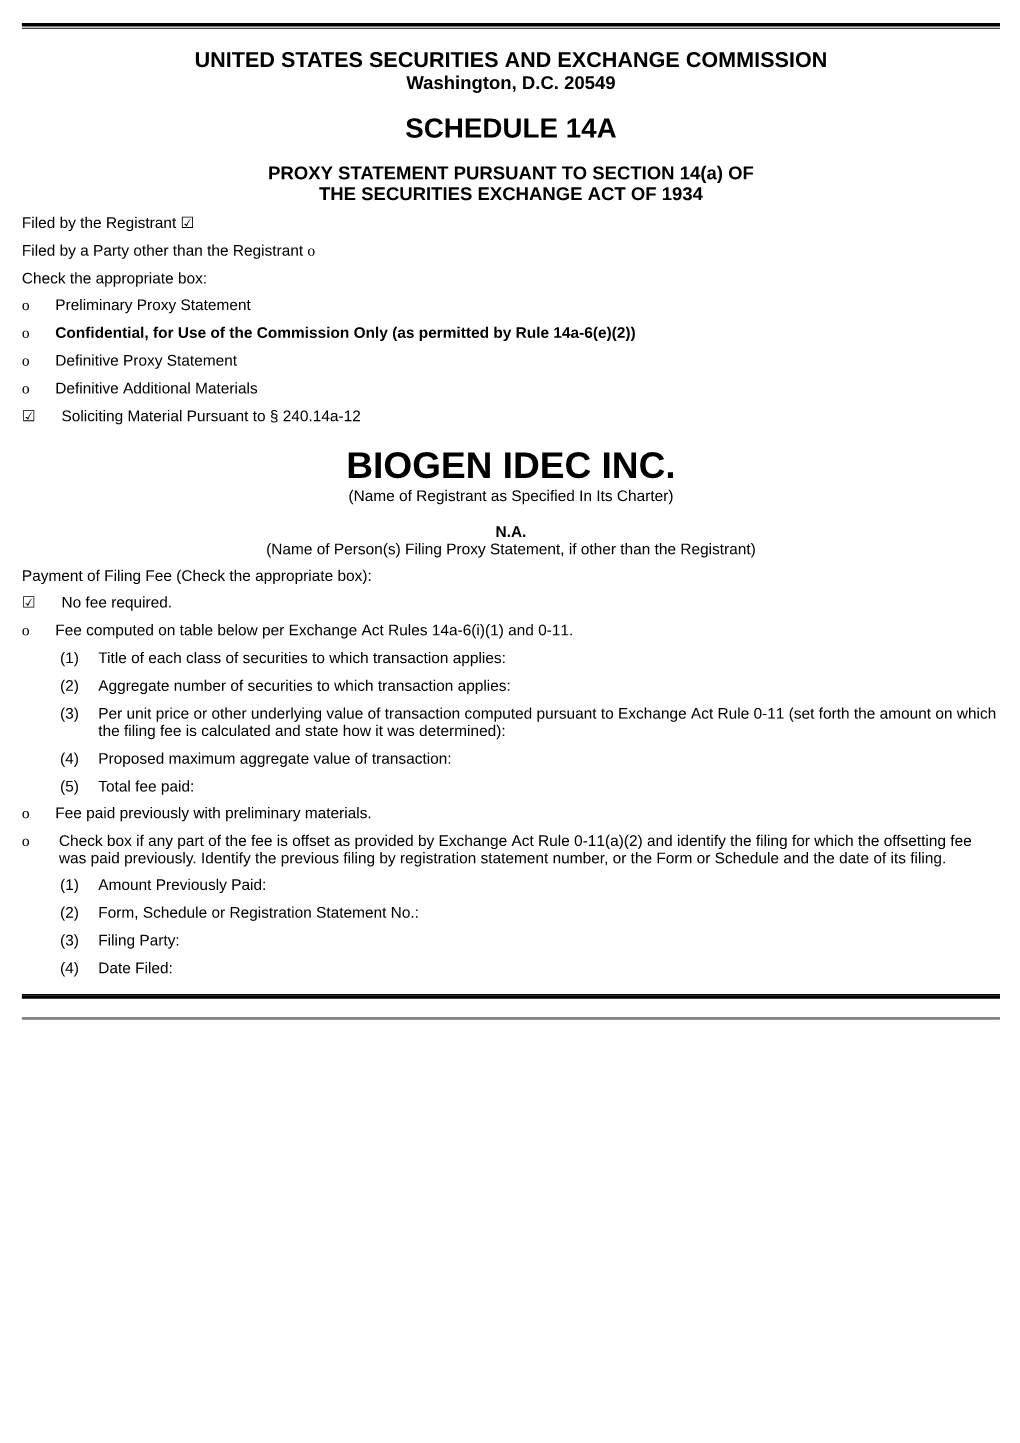 BIOGEN IDEC INC. (Name of Registrant As Specified in Its Charter)